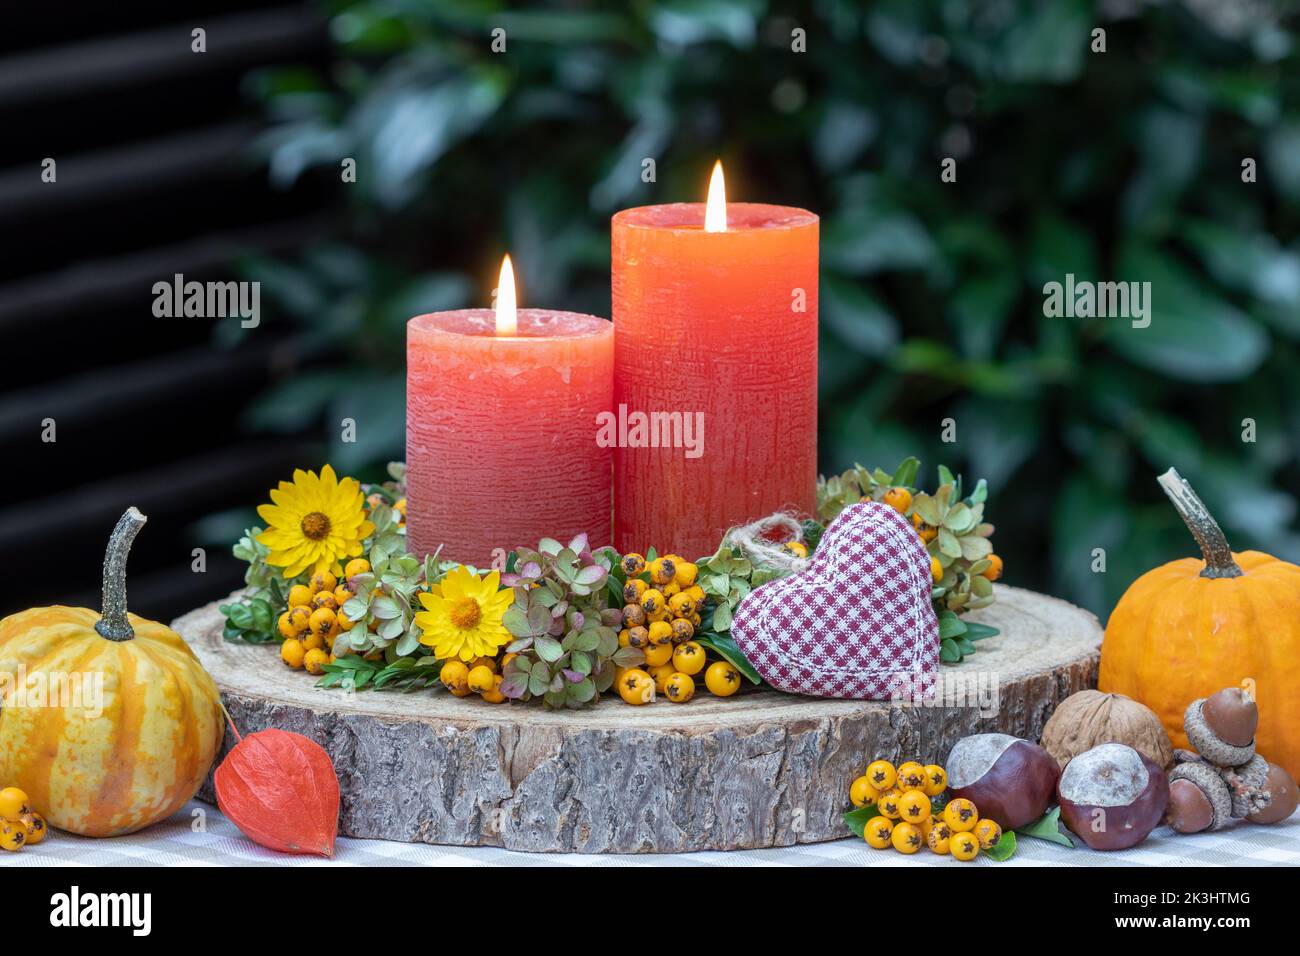 autumn arrangement with candles and wreath of flowers Stock Photo